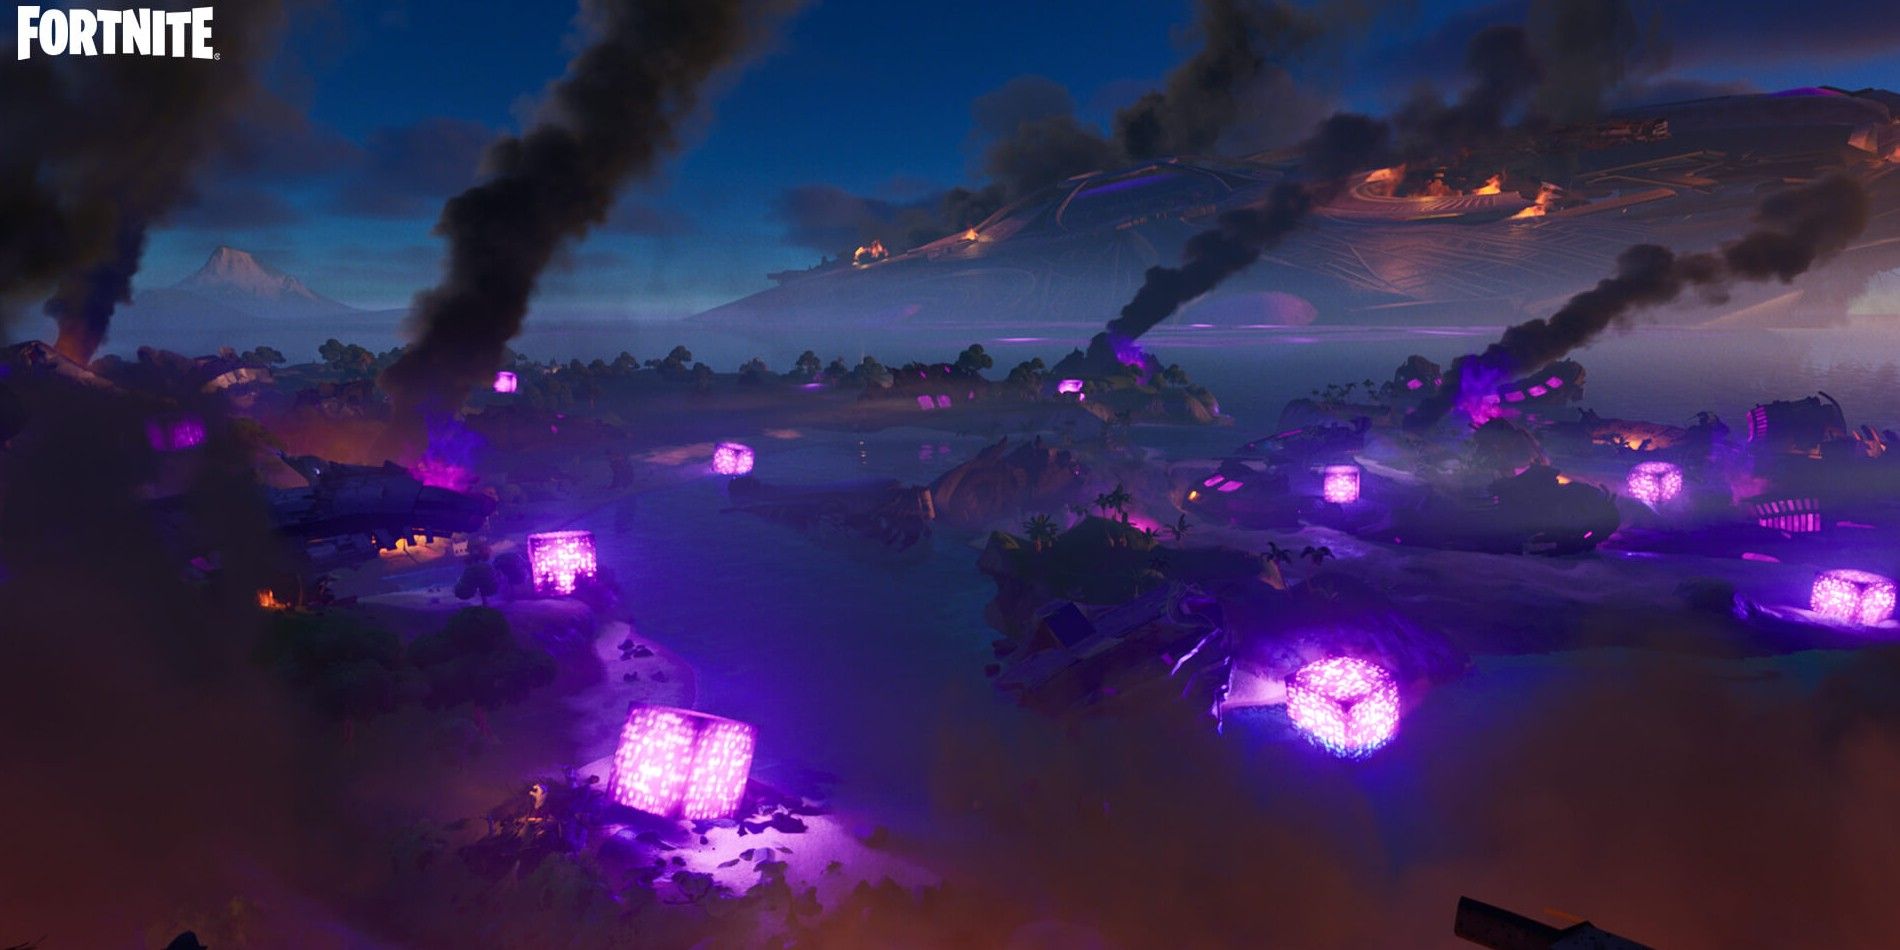 Cubes all over the island in Fortnite Season 8.